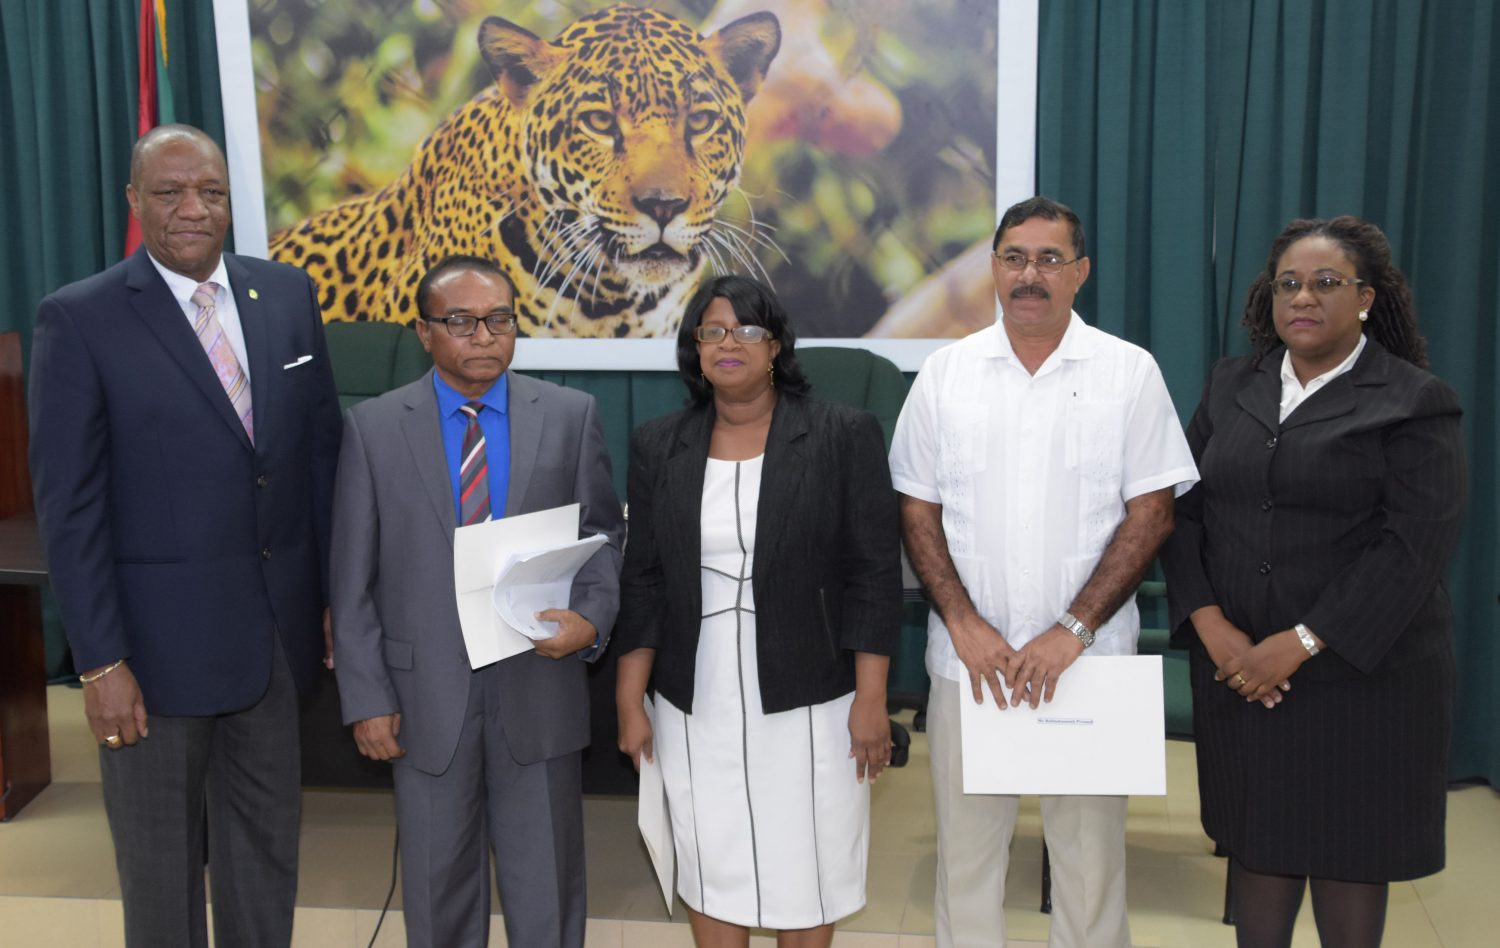 Minister of State Joseph Harmon (at left) with Chairman of the Integrity Commission Kumar Doraisami, Commissioners Rosemary Benjamin-Noble and Pandit Rabindranauth Persaud, and Chief Magistrate Ann McLennan. (Ministry of the Presidency photo)
